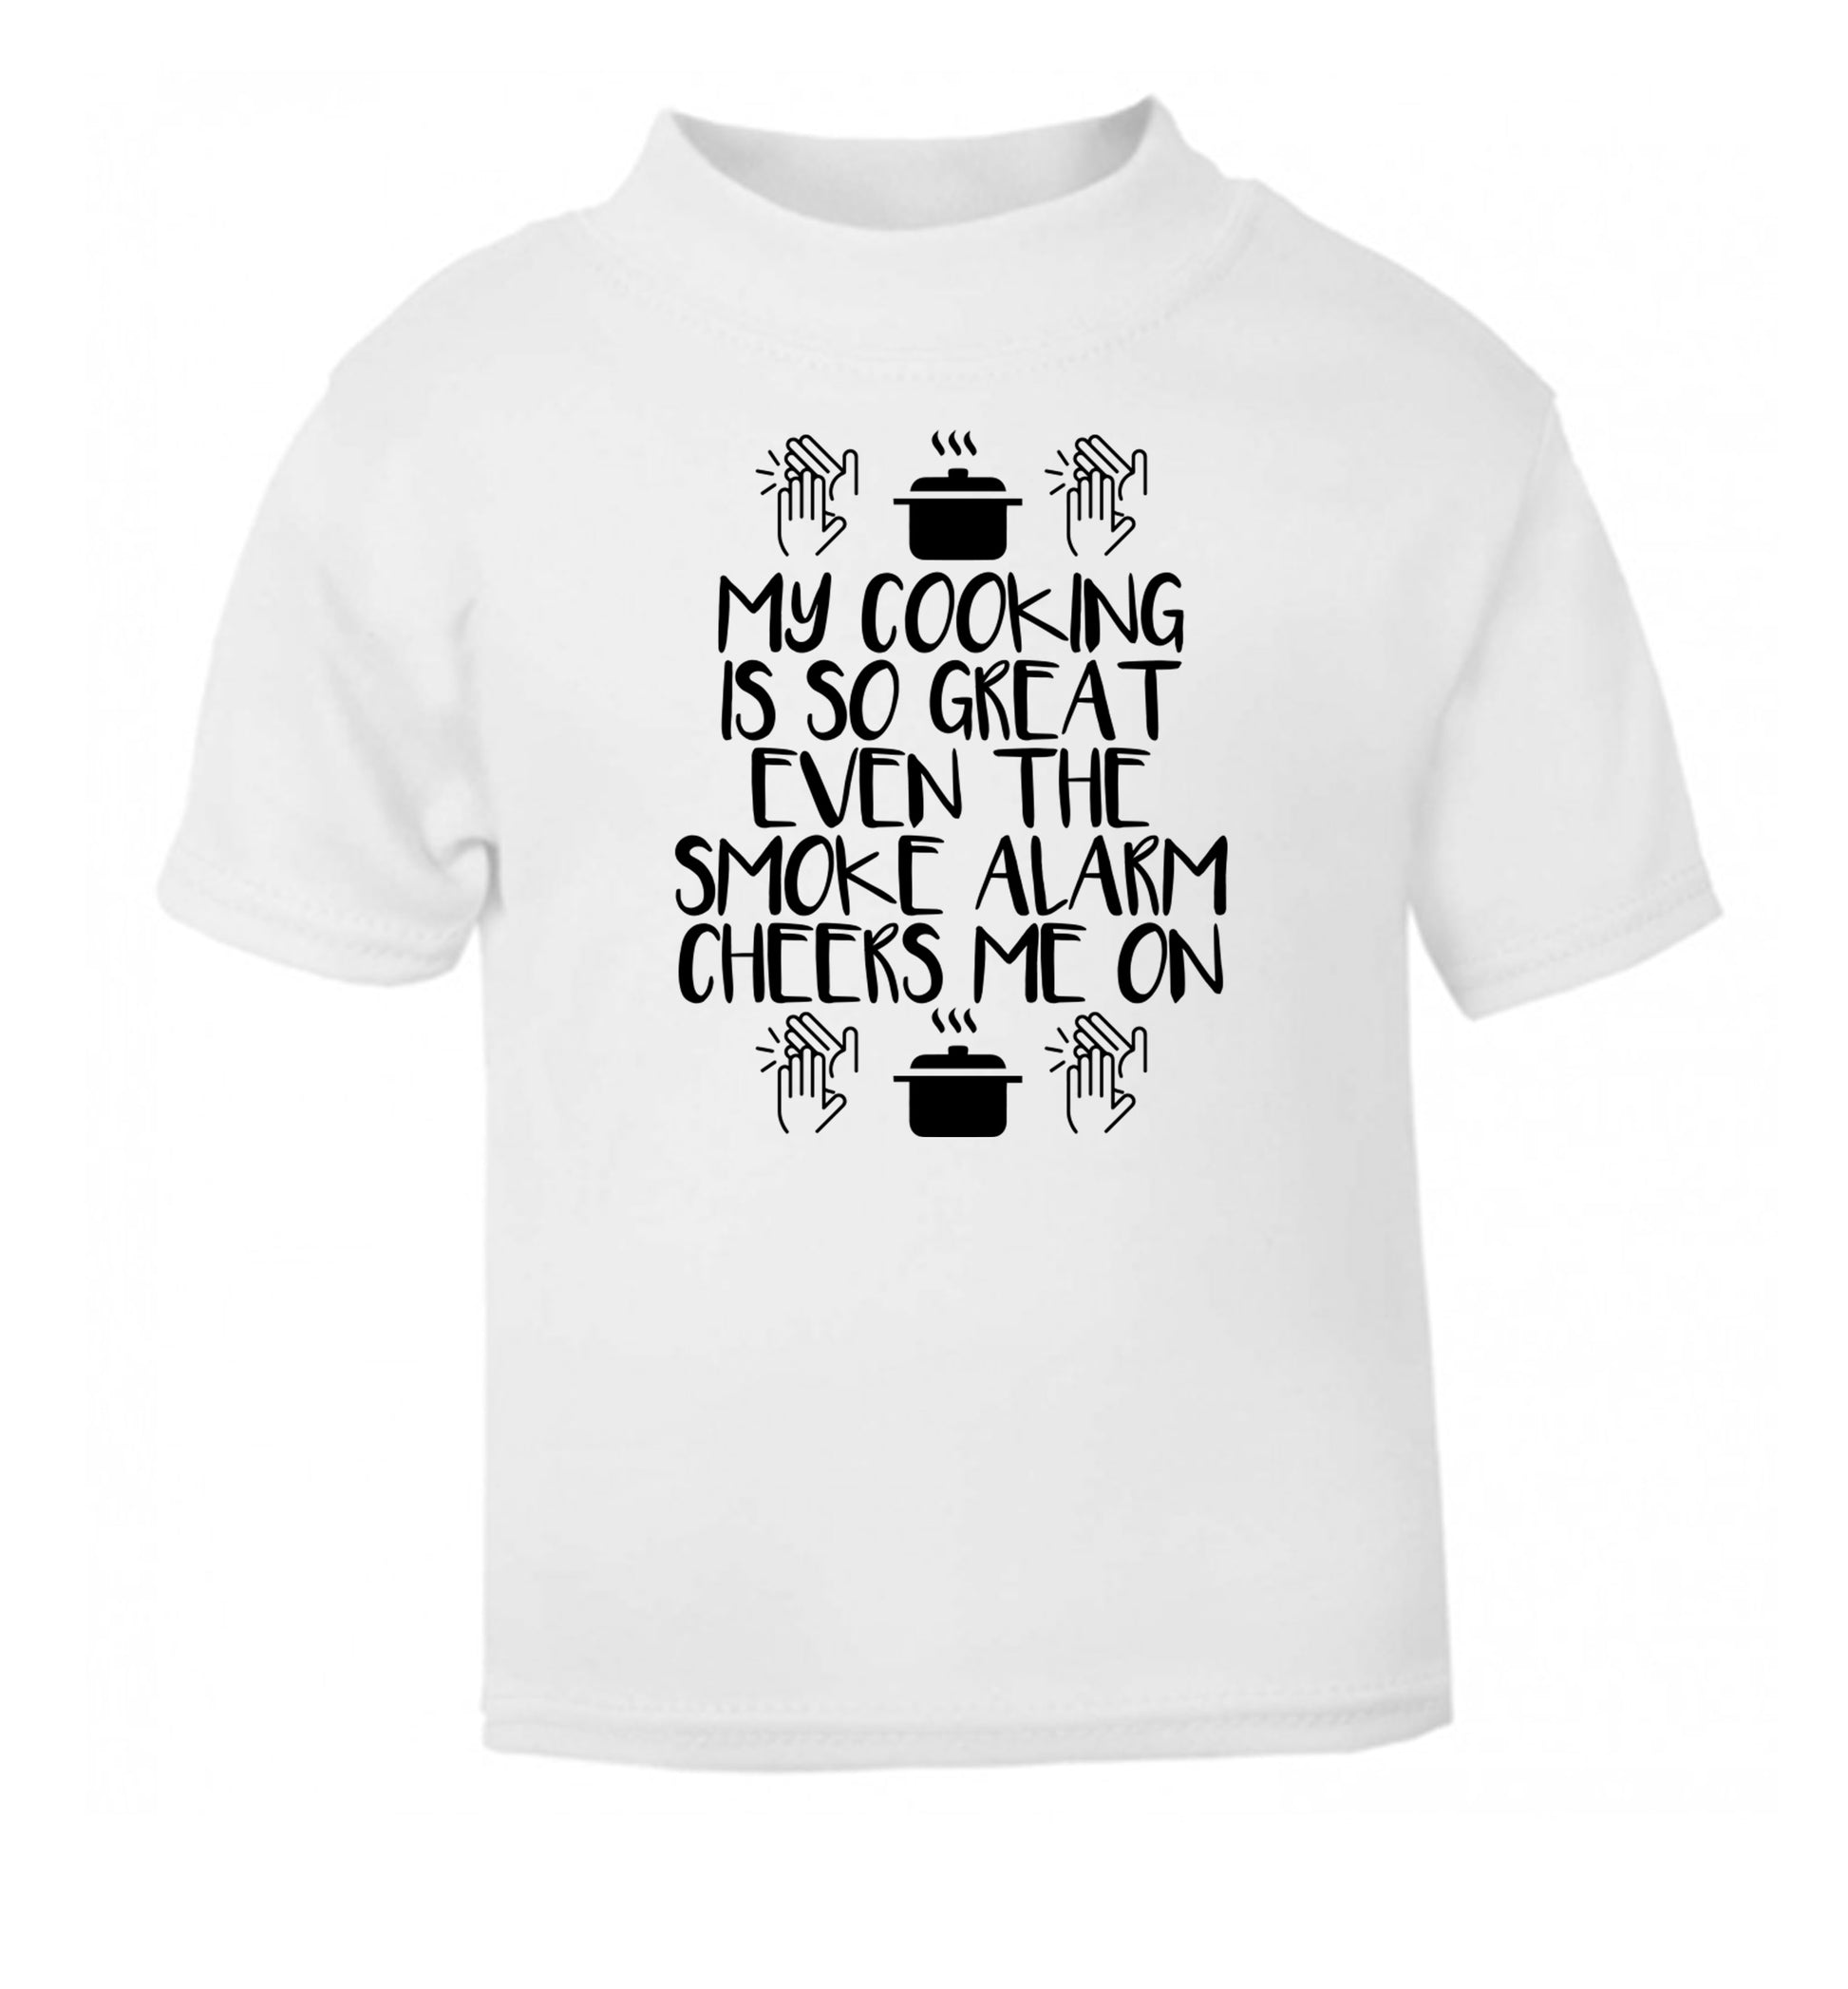 My cooking is so great even the smoke alarm cheers me on! white Baby Toddler Tshirt 2 Years